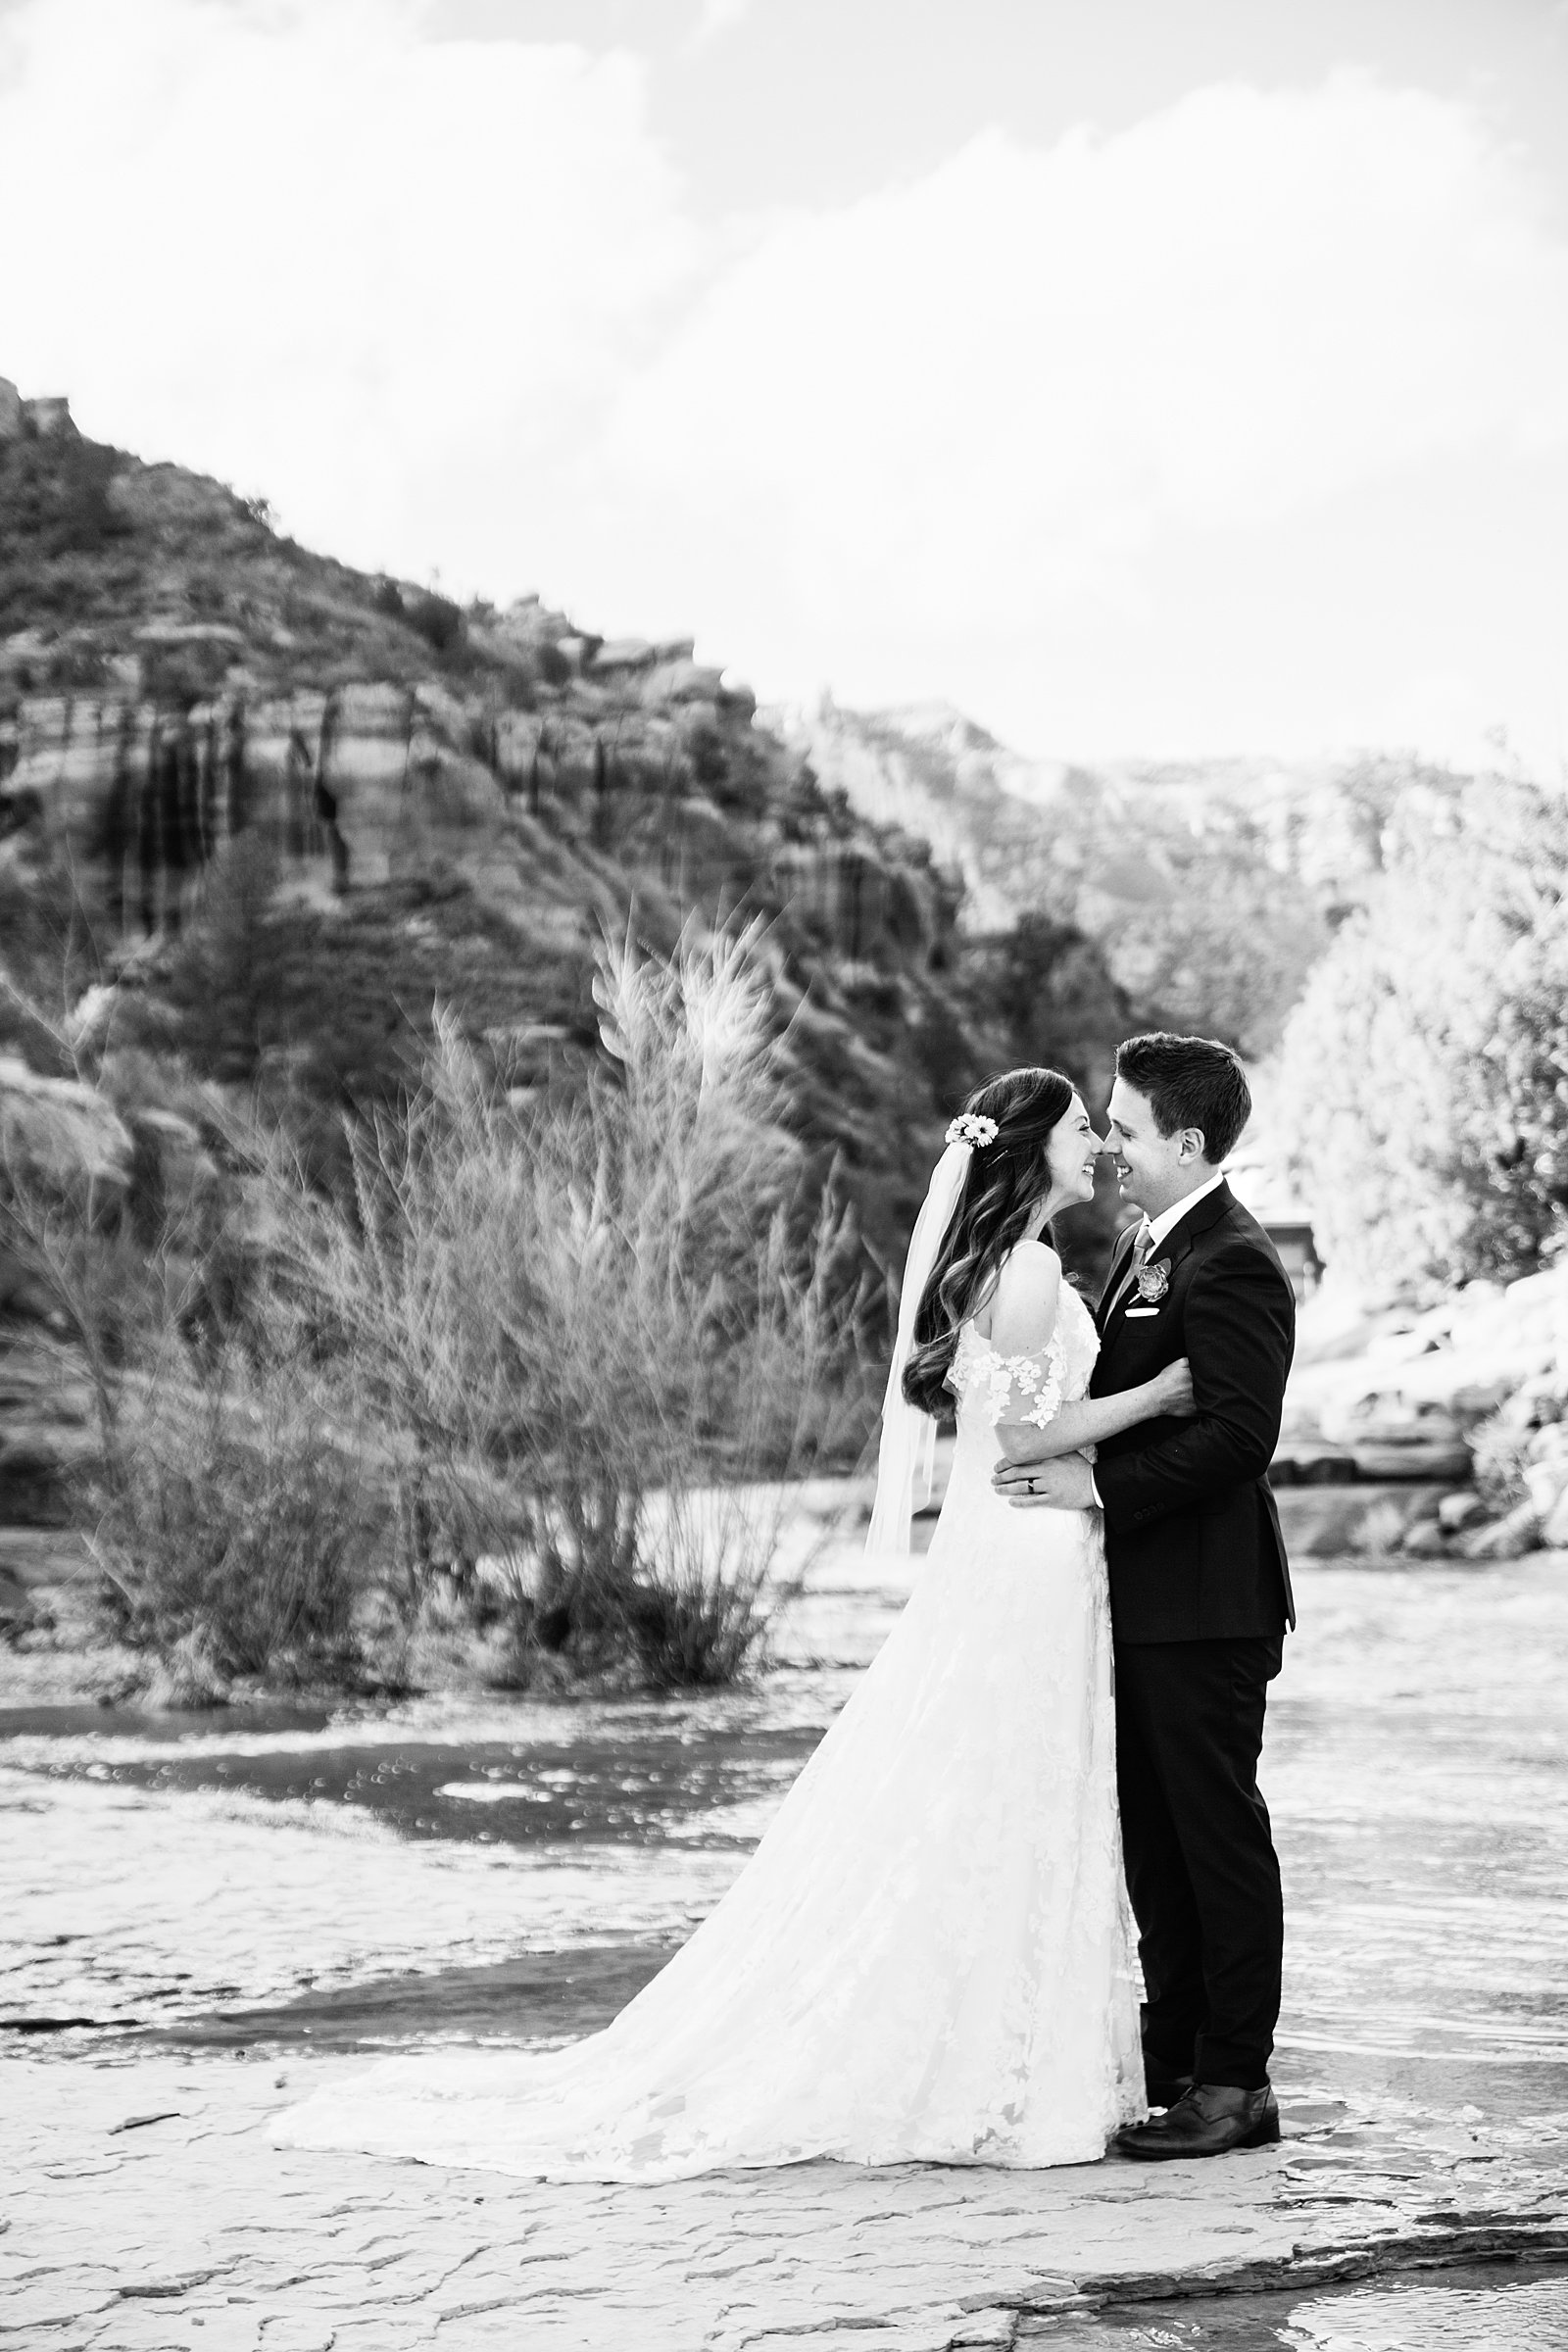 Bride and Groom share an intimate moment at their Slide Rock elopement by Arizona elopement photographer PMA Photography.